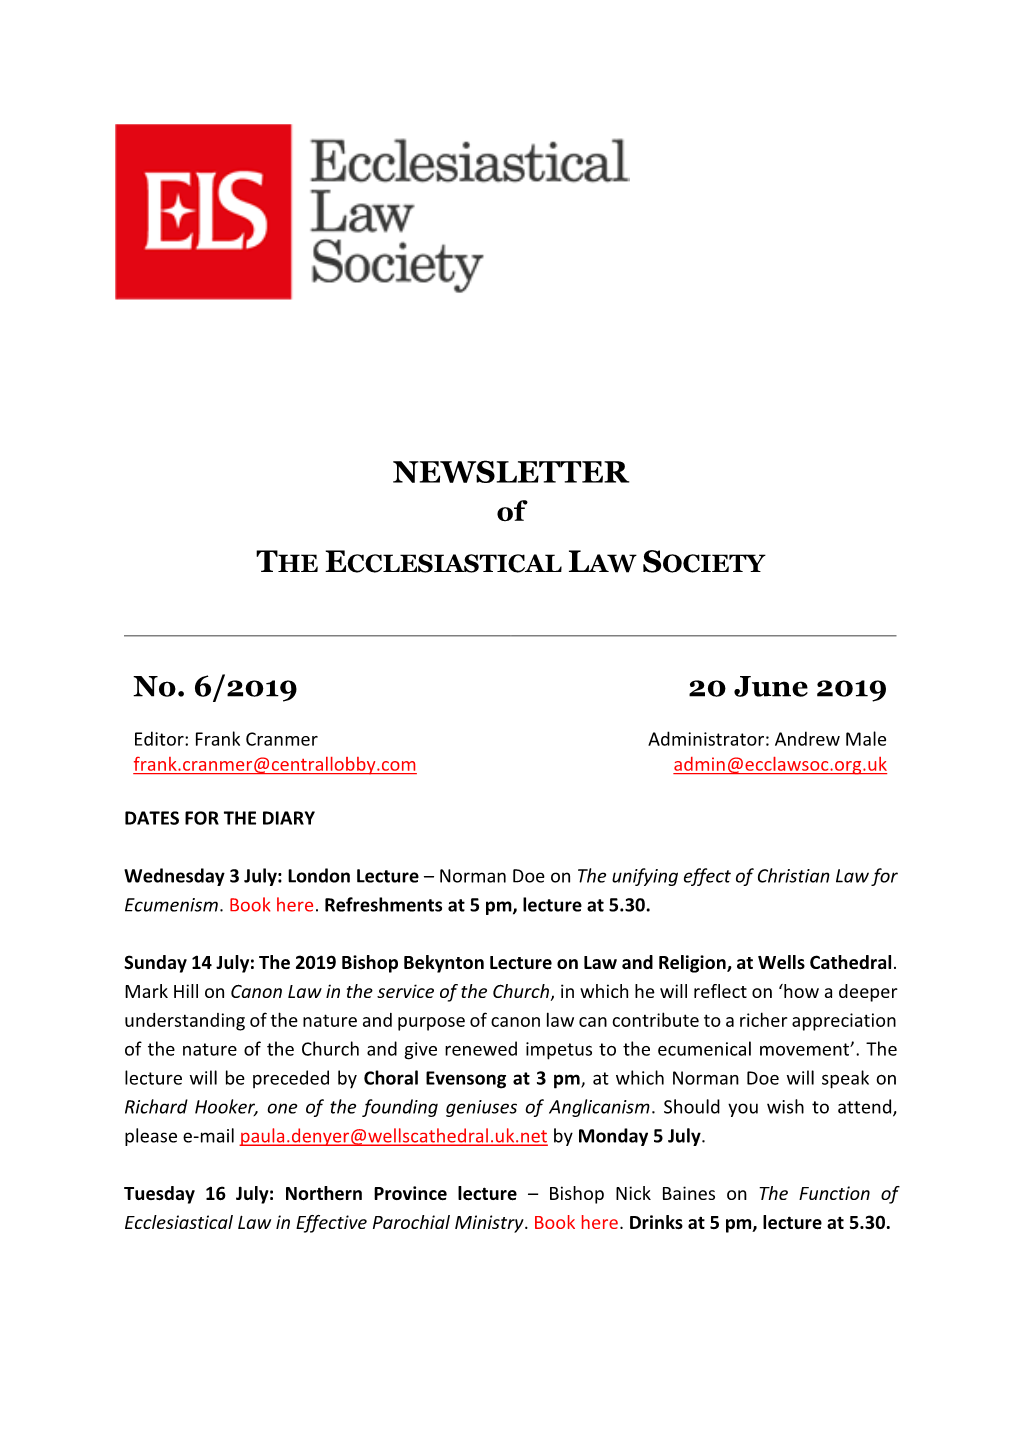 NEWSLETTER of the ECCLESIASTICAL LAW SOCIETY